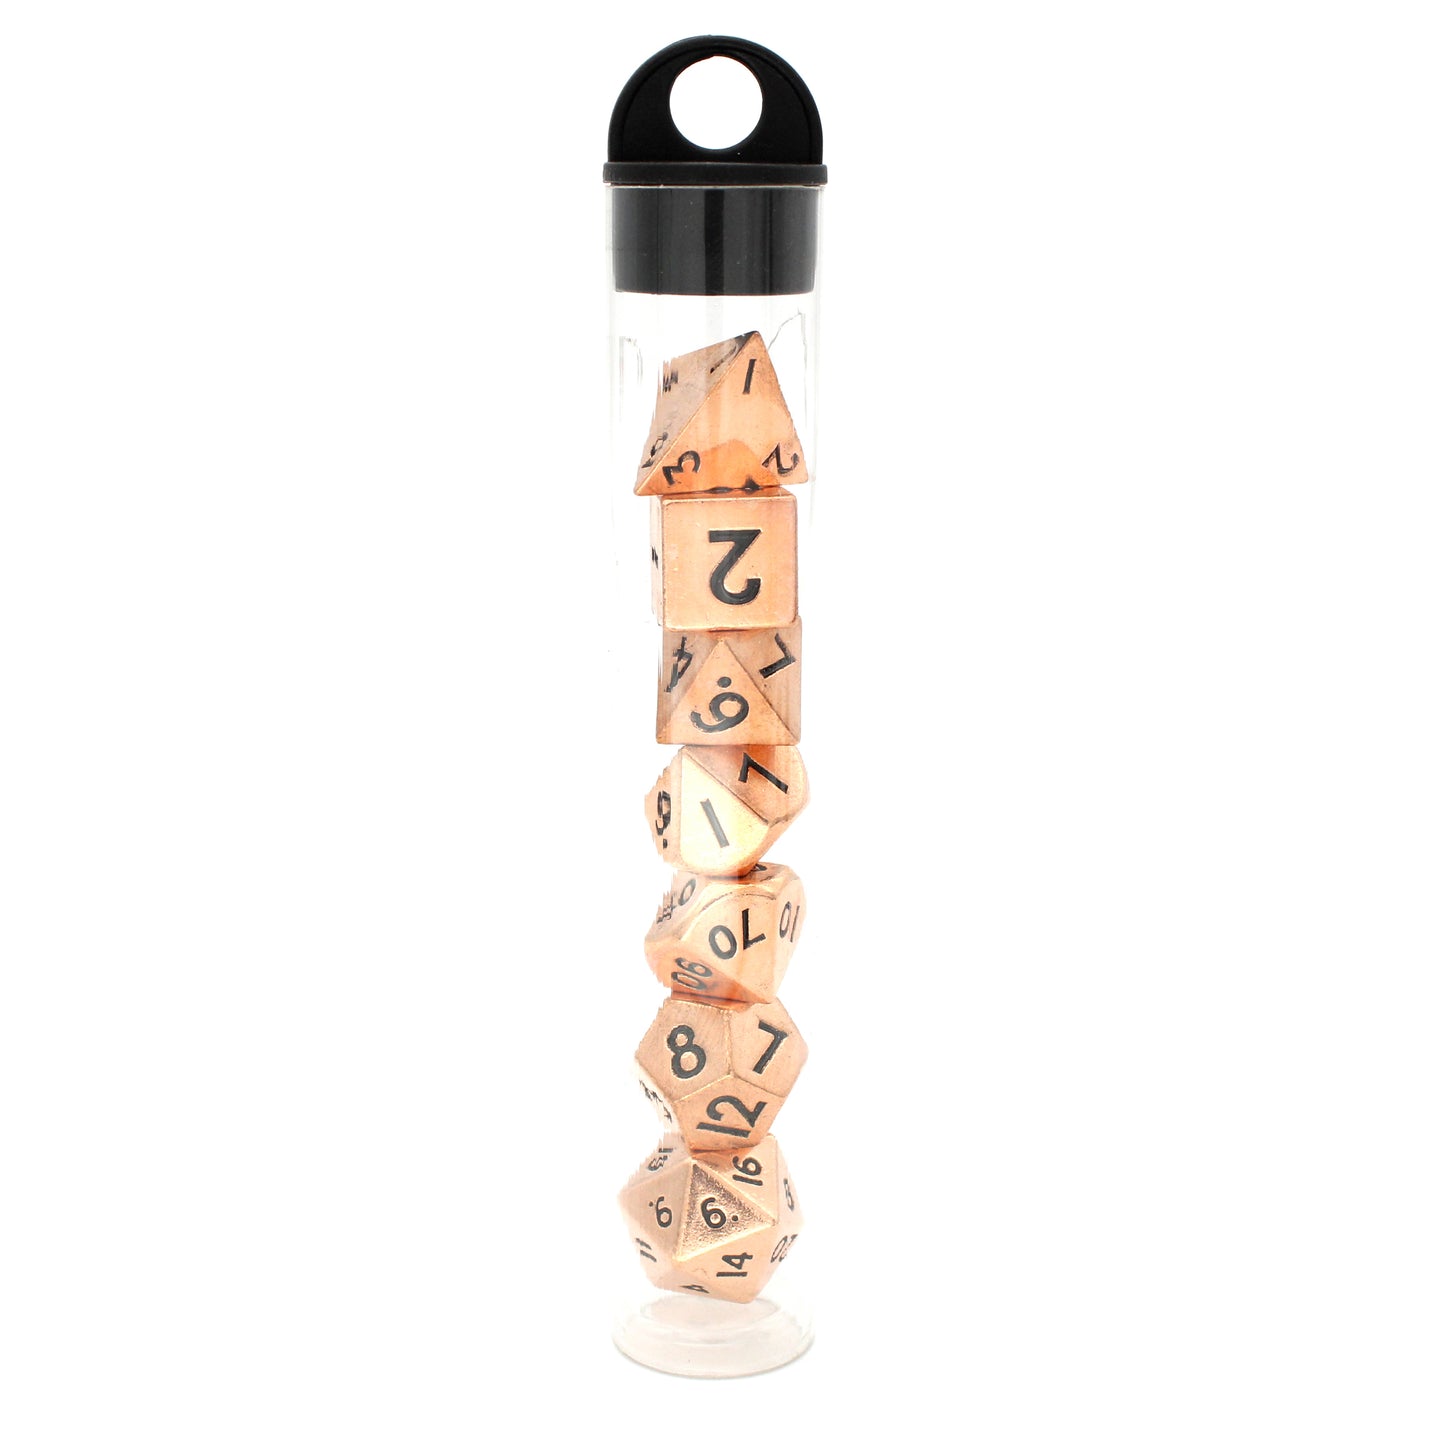 Brats is a 7-piece set of shiny rose gold 10mm metal dice.